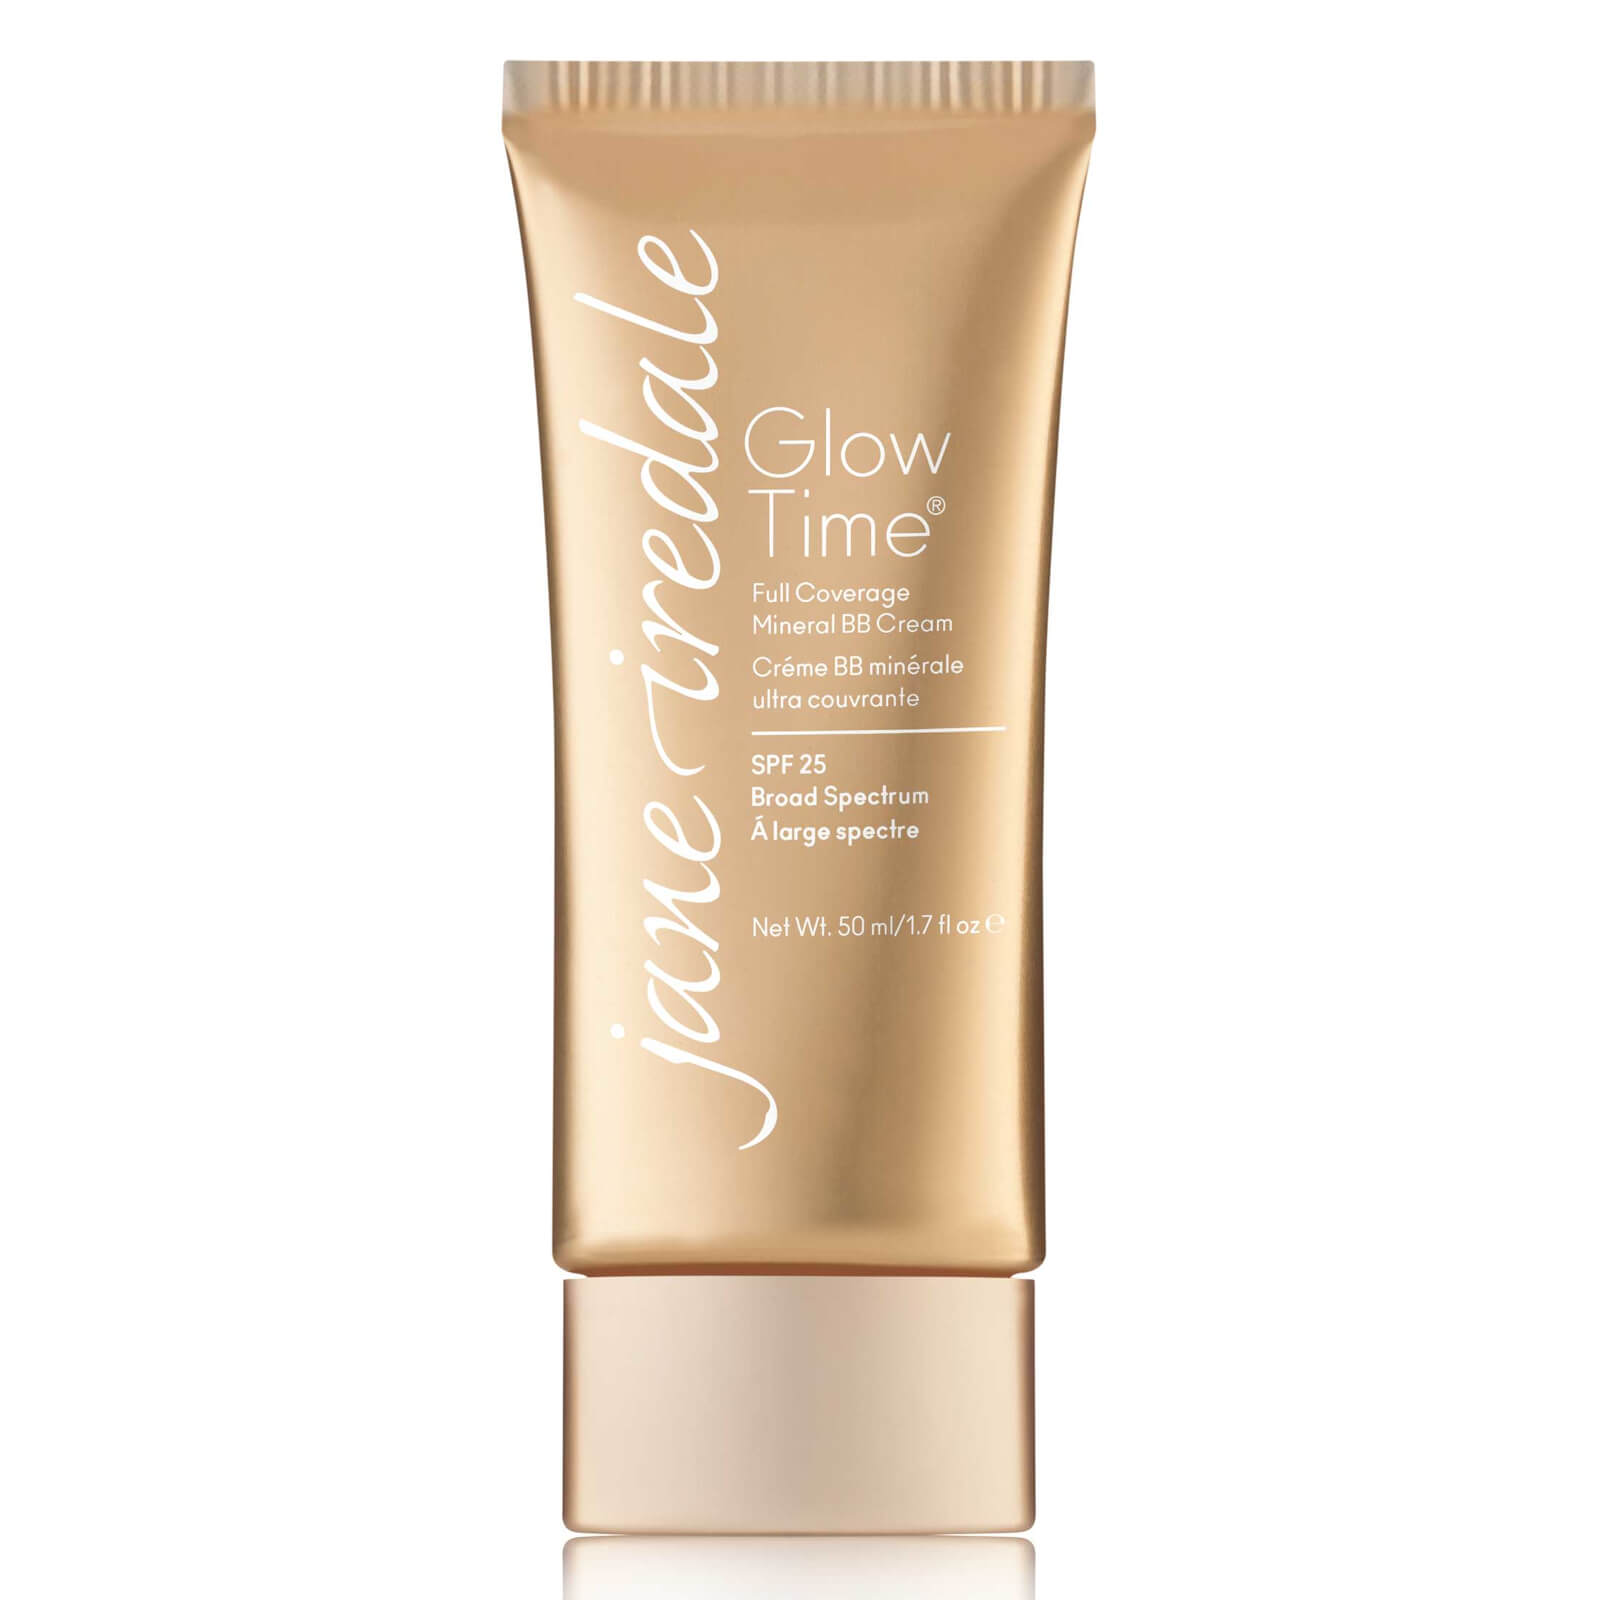 jane iredale Glow Time Full Coverage Mineral BB Cream 50ml (Various Shades) - BB8 - SPF25